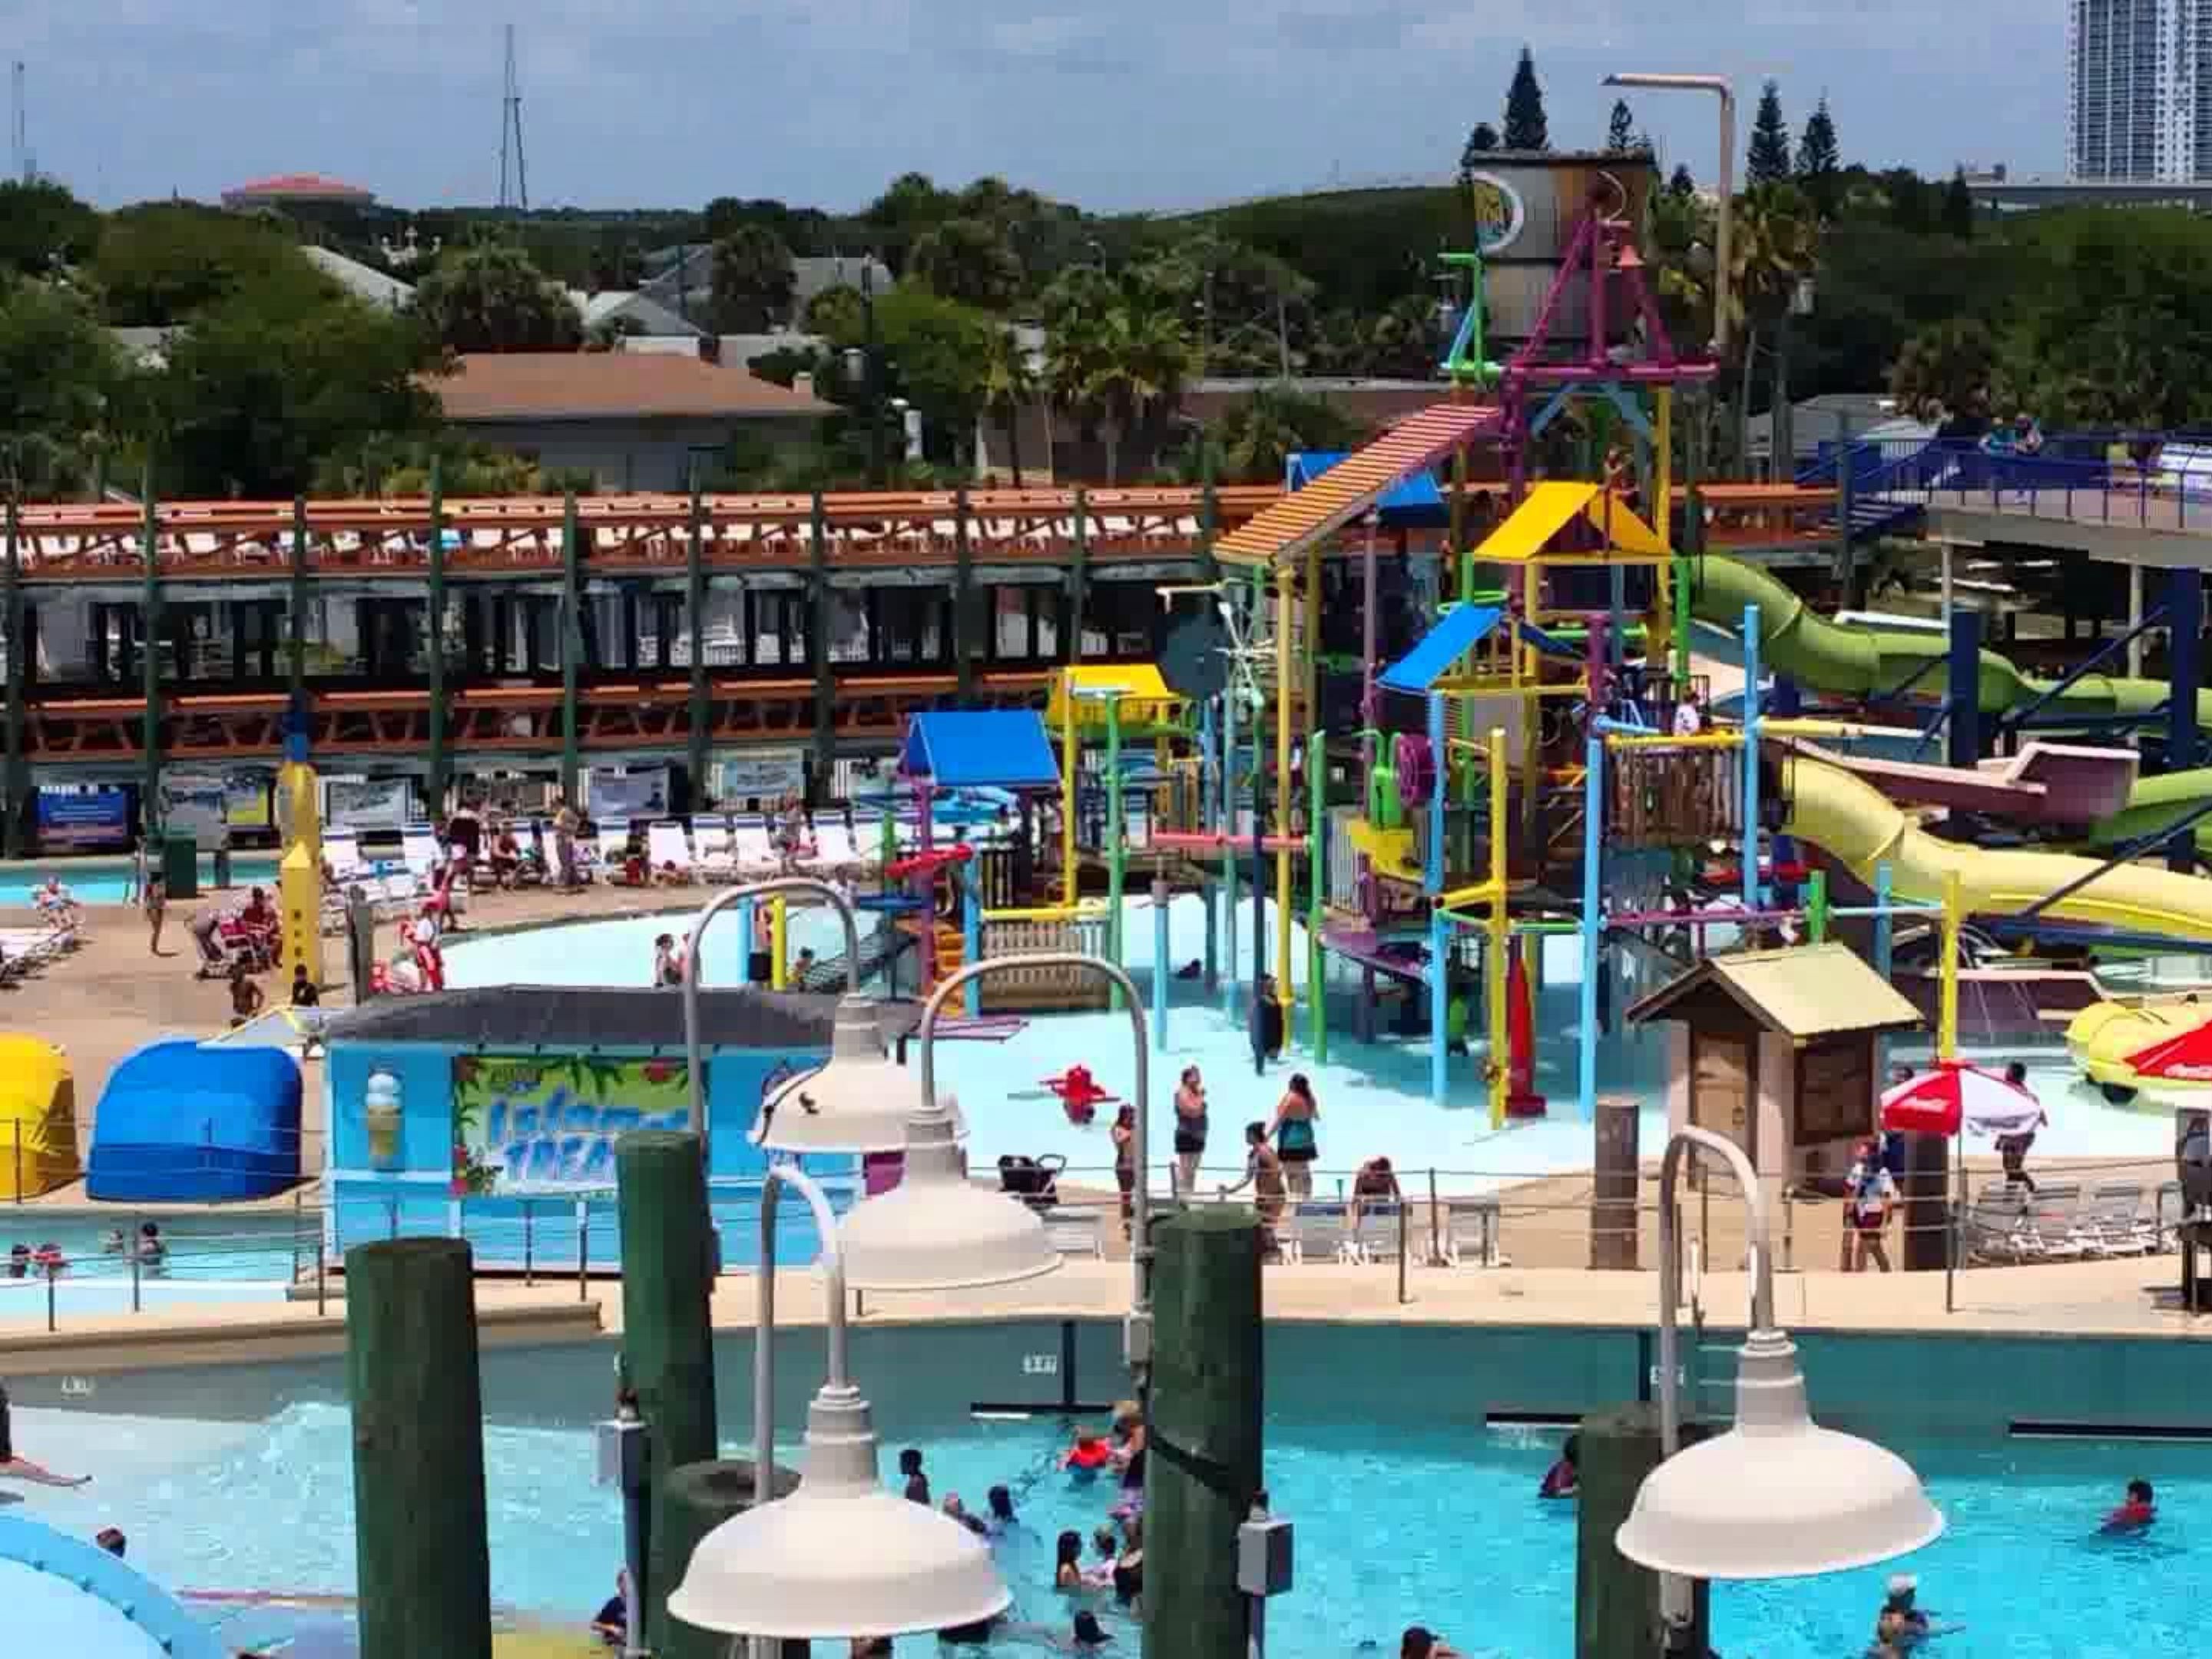 Spend a day at this family-friendly water park with go-karts, mini-golf, an arcade, laser tag & a climbing wall. Located just 1 mile from our hotel.